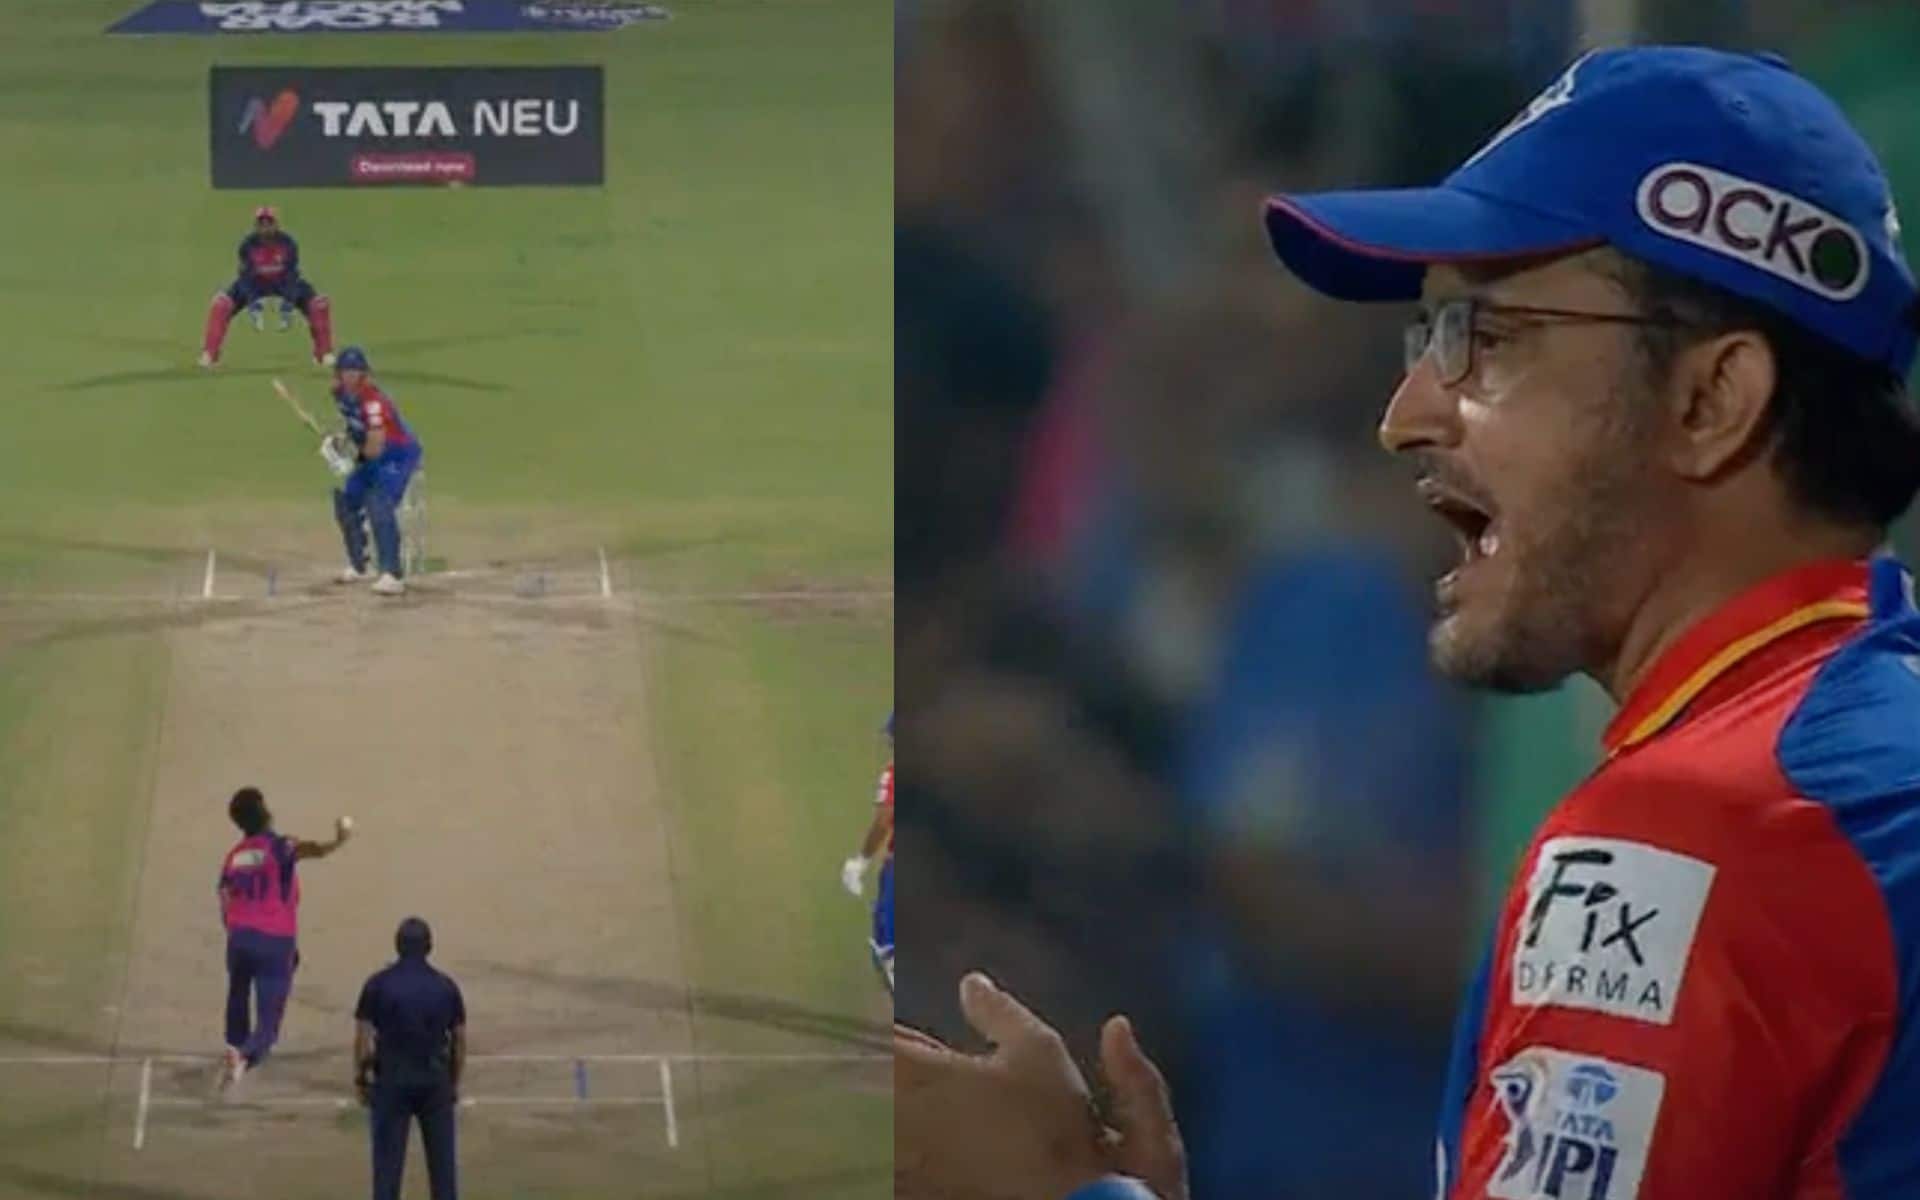 Sourav Ganguly cheering for Stubbs (X.com)